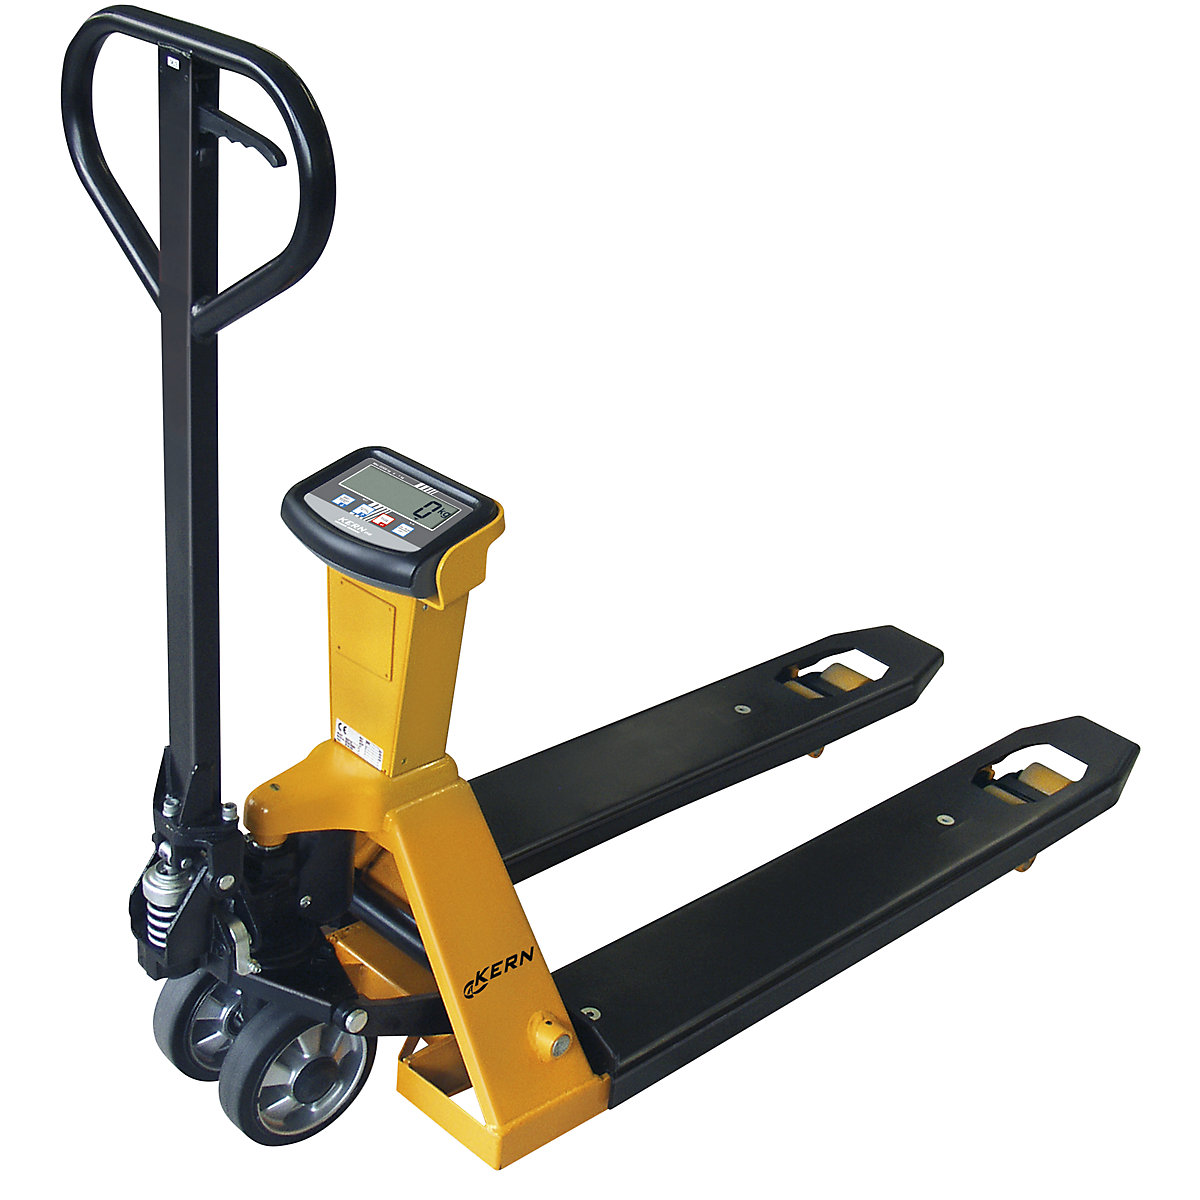 Pallet truck with LCD display – KERN